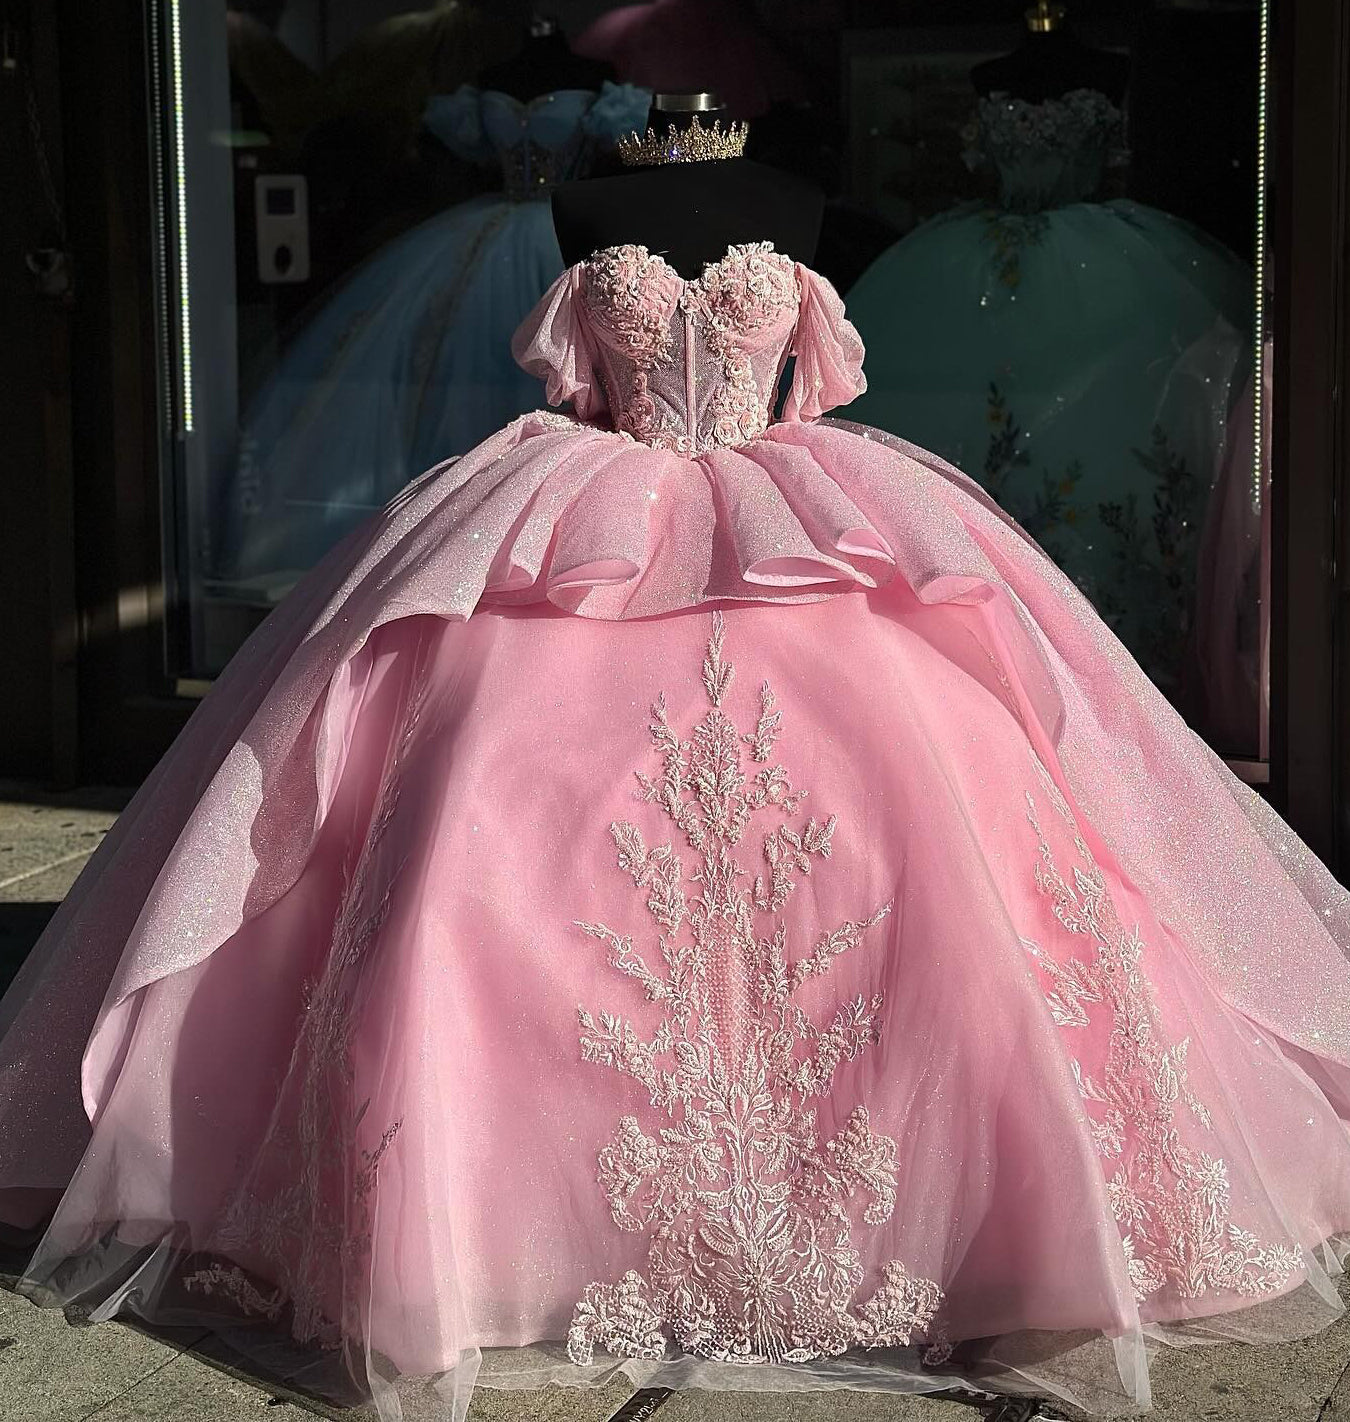 Pink Off Shoulder Sweetheart Corset Ball Gown Princess Quinceanera Dresses Lace Appliques Sparkly Beaded Tiered Tulle Formal Prom Party Gowns Sweet 16 Dress